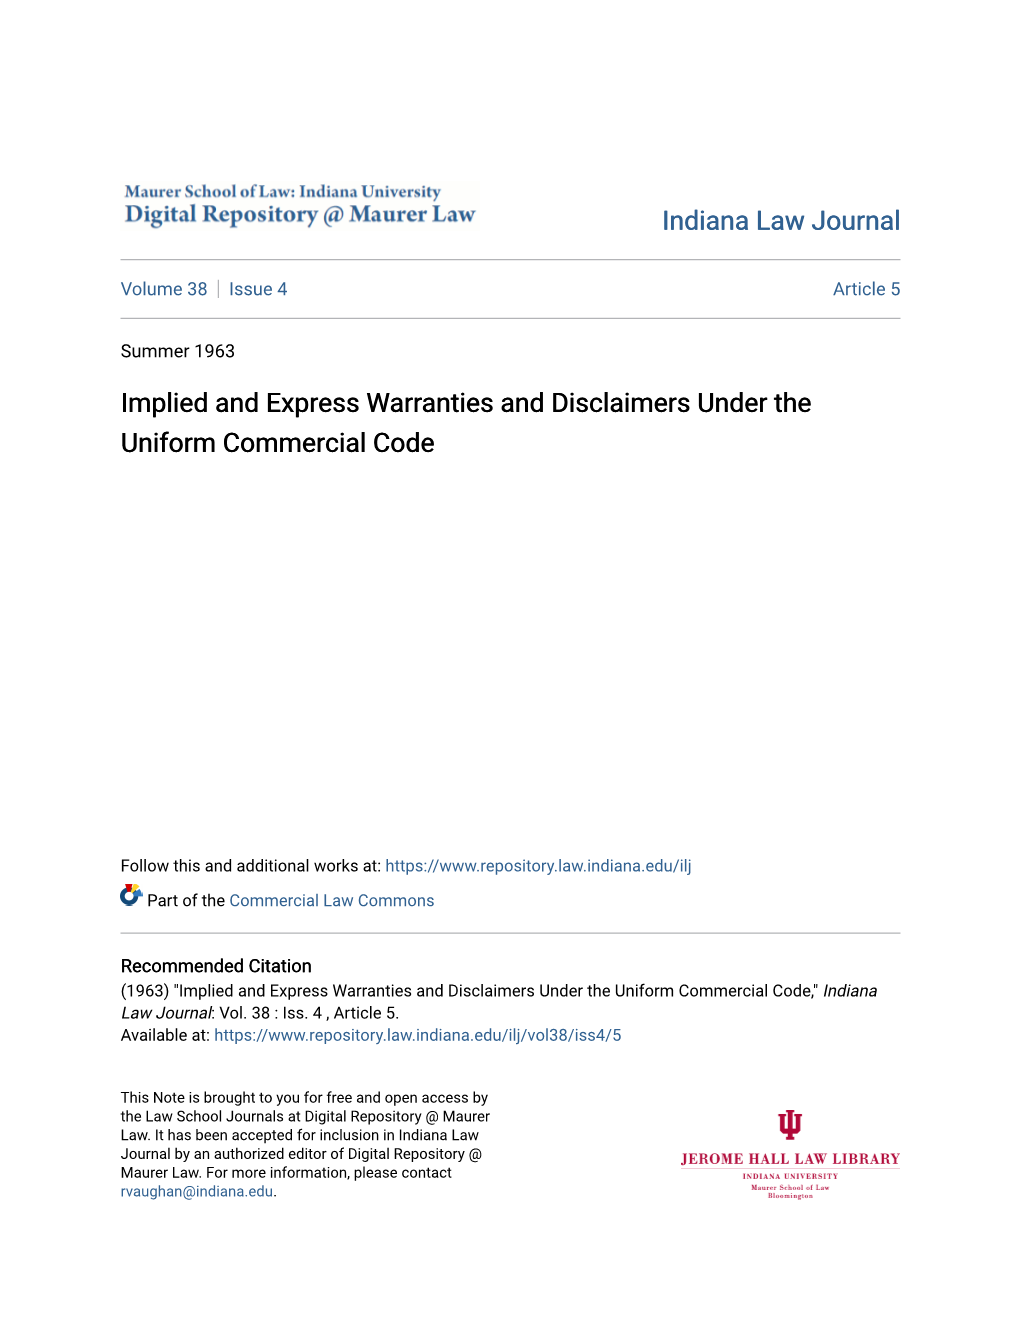 Implied and Express Warranties and Disclaimers Under the Uniform Commercial Code